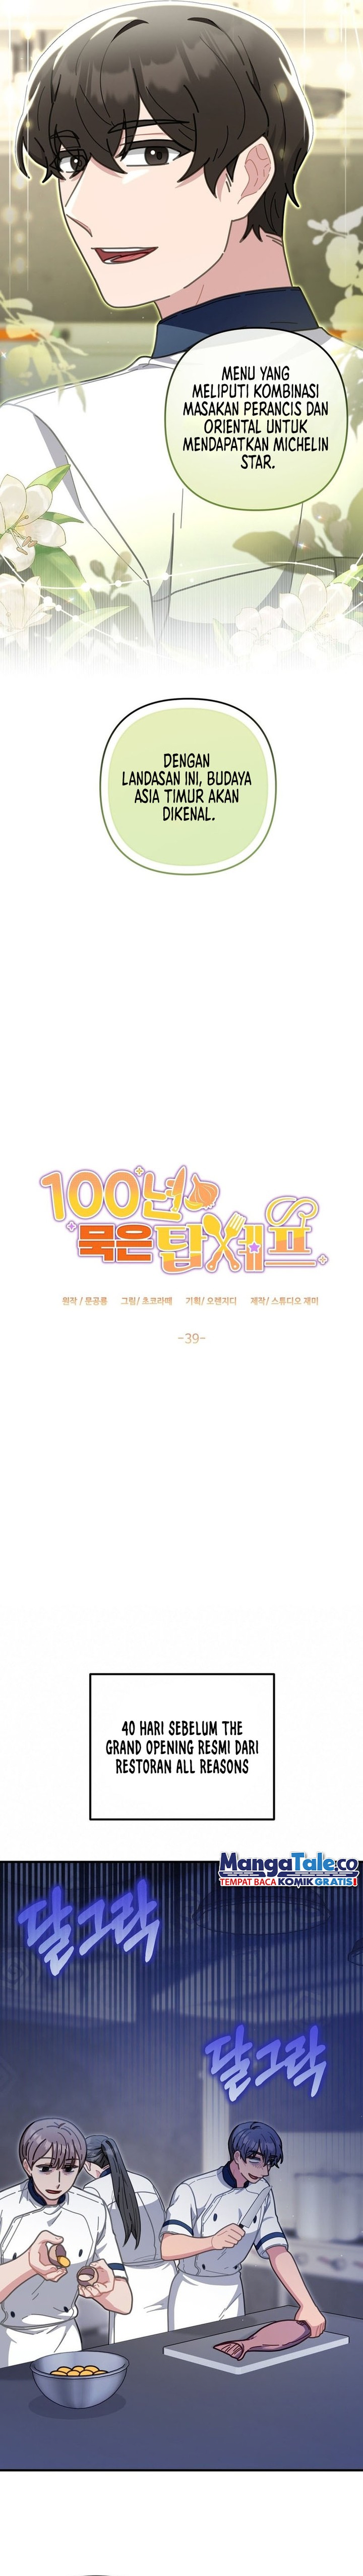 100 Years Old Top Chef Chapter 39 Image 2